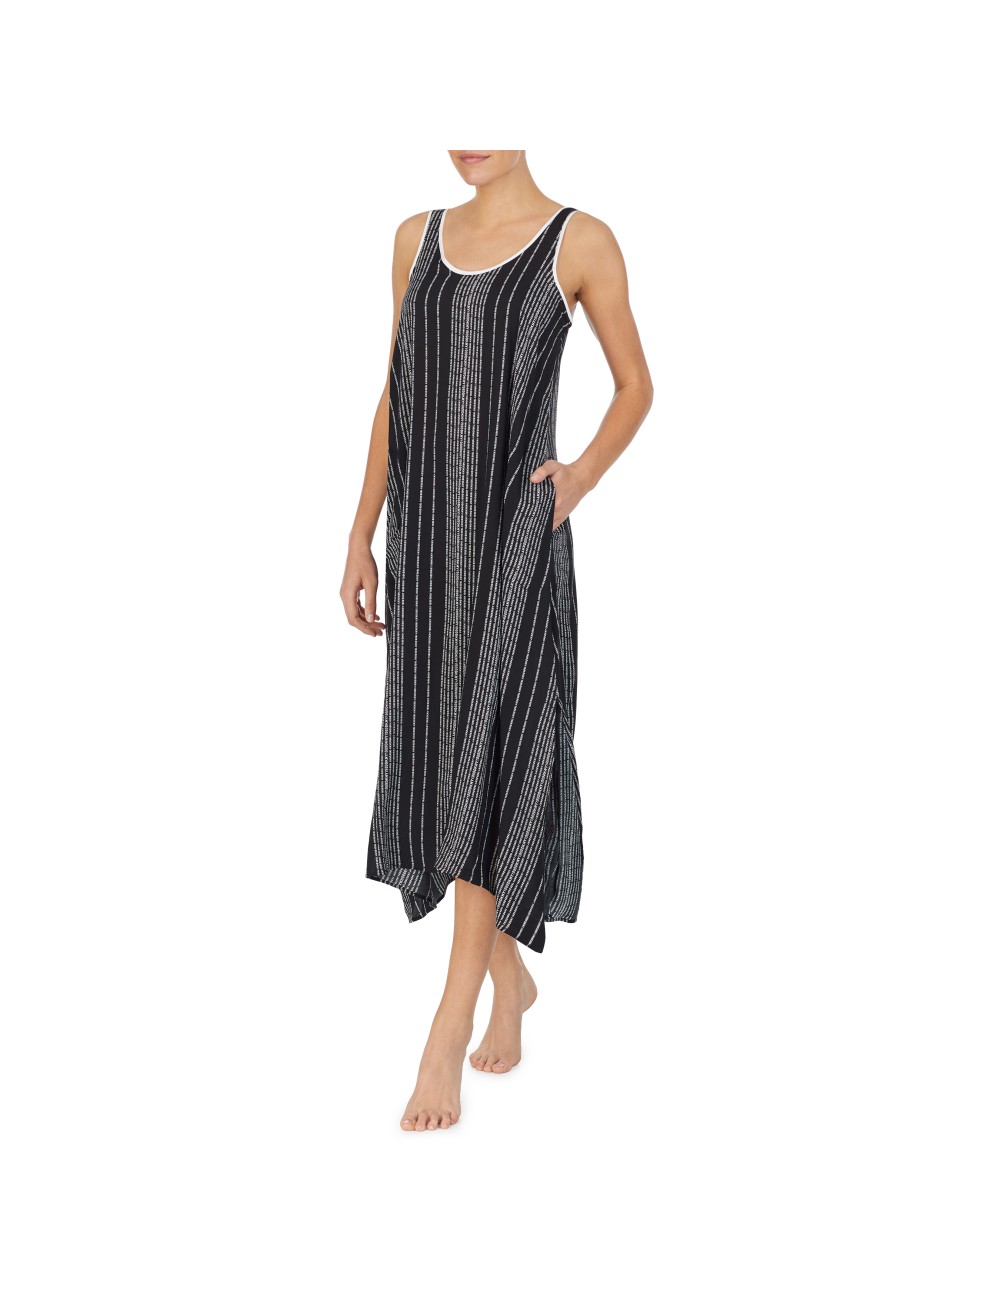 Dkny Woman Highled Linear Print